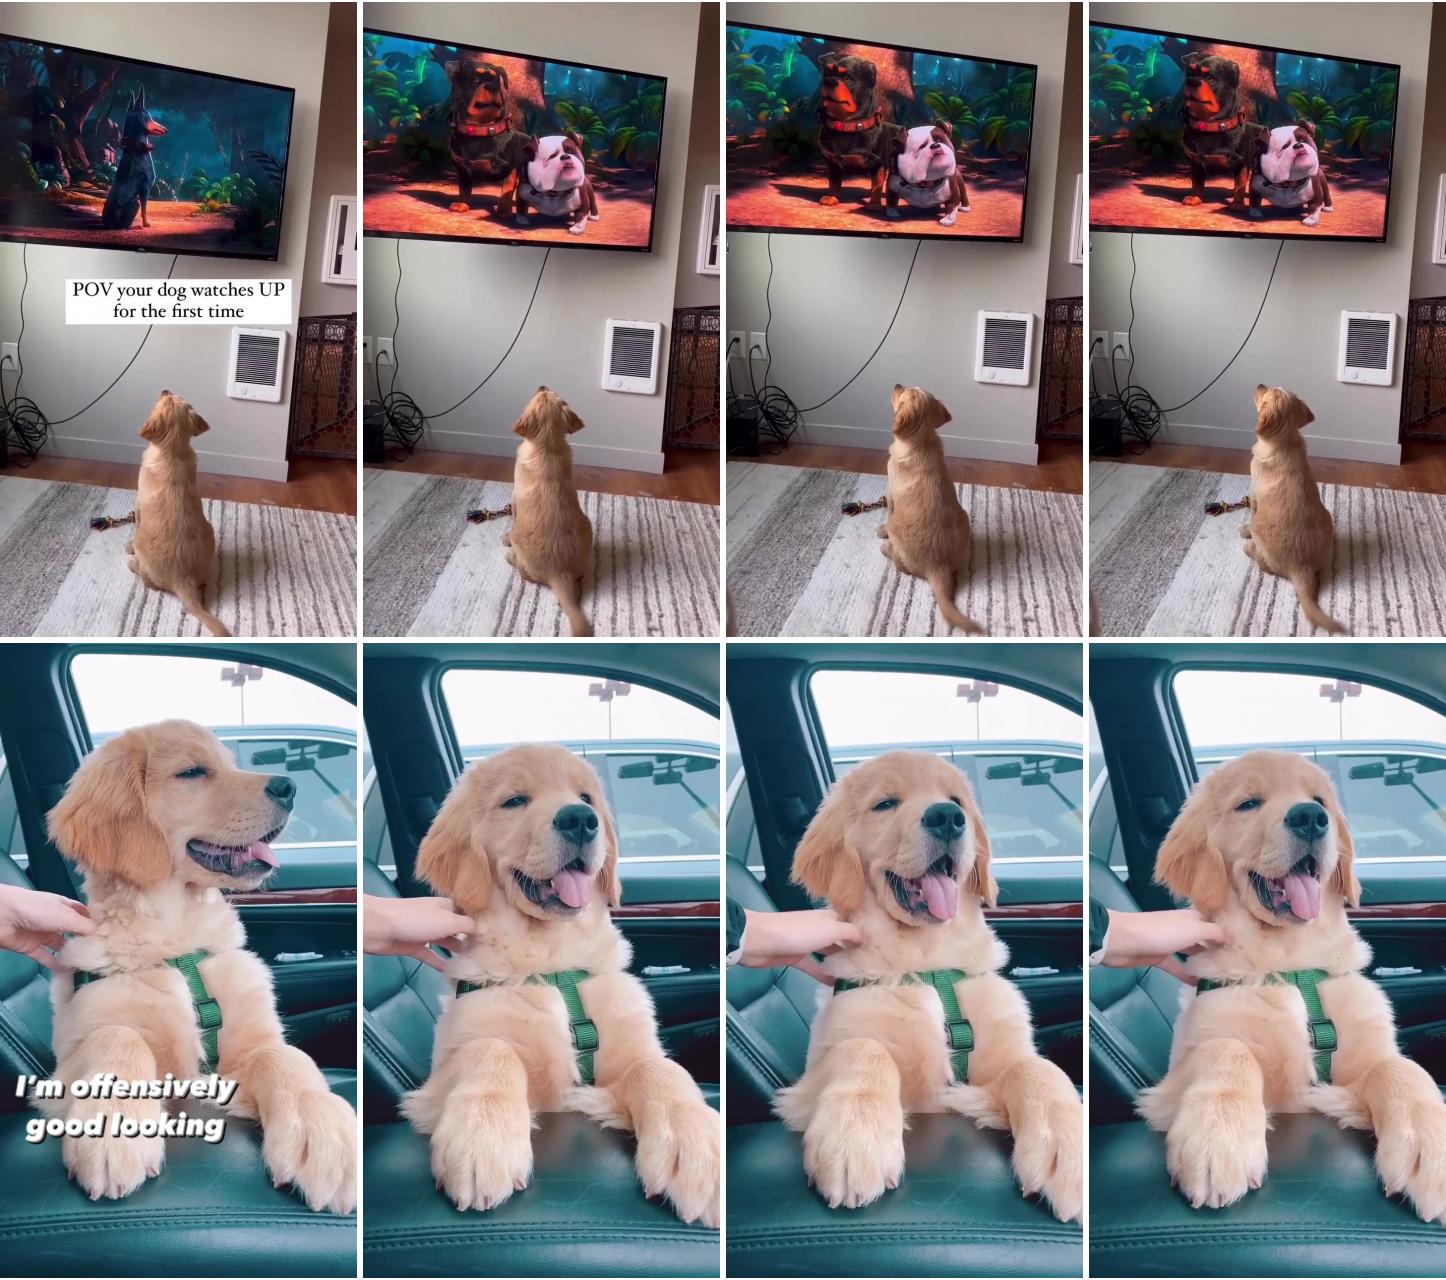 Pov your dog watches up for the first time; yes yes i am, and also too cute